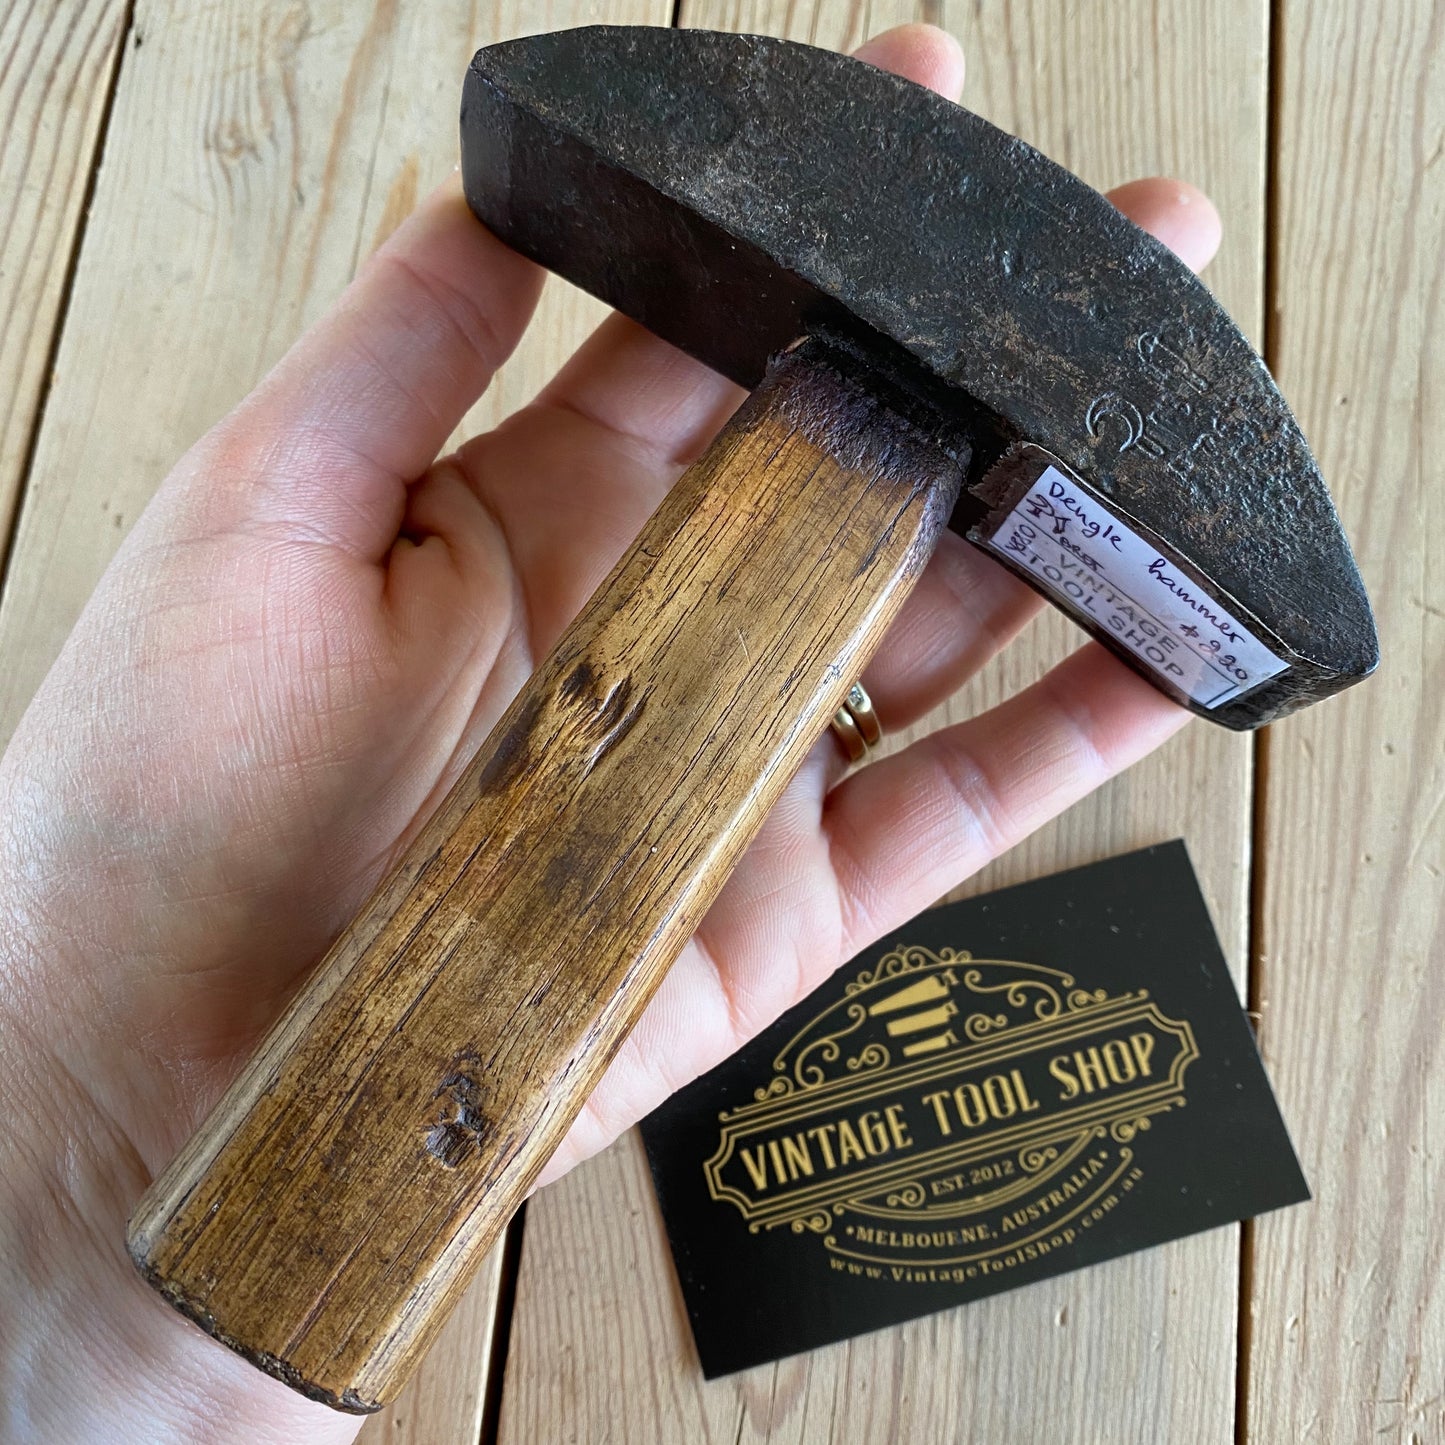 SOLD Y880 Antique FRENCH Dengle HAMMER